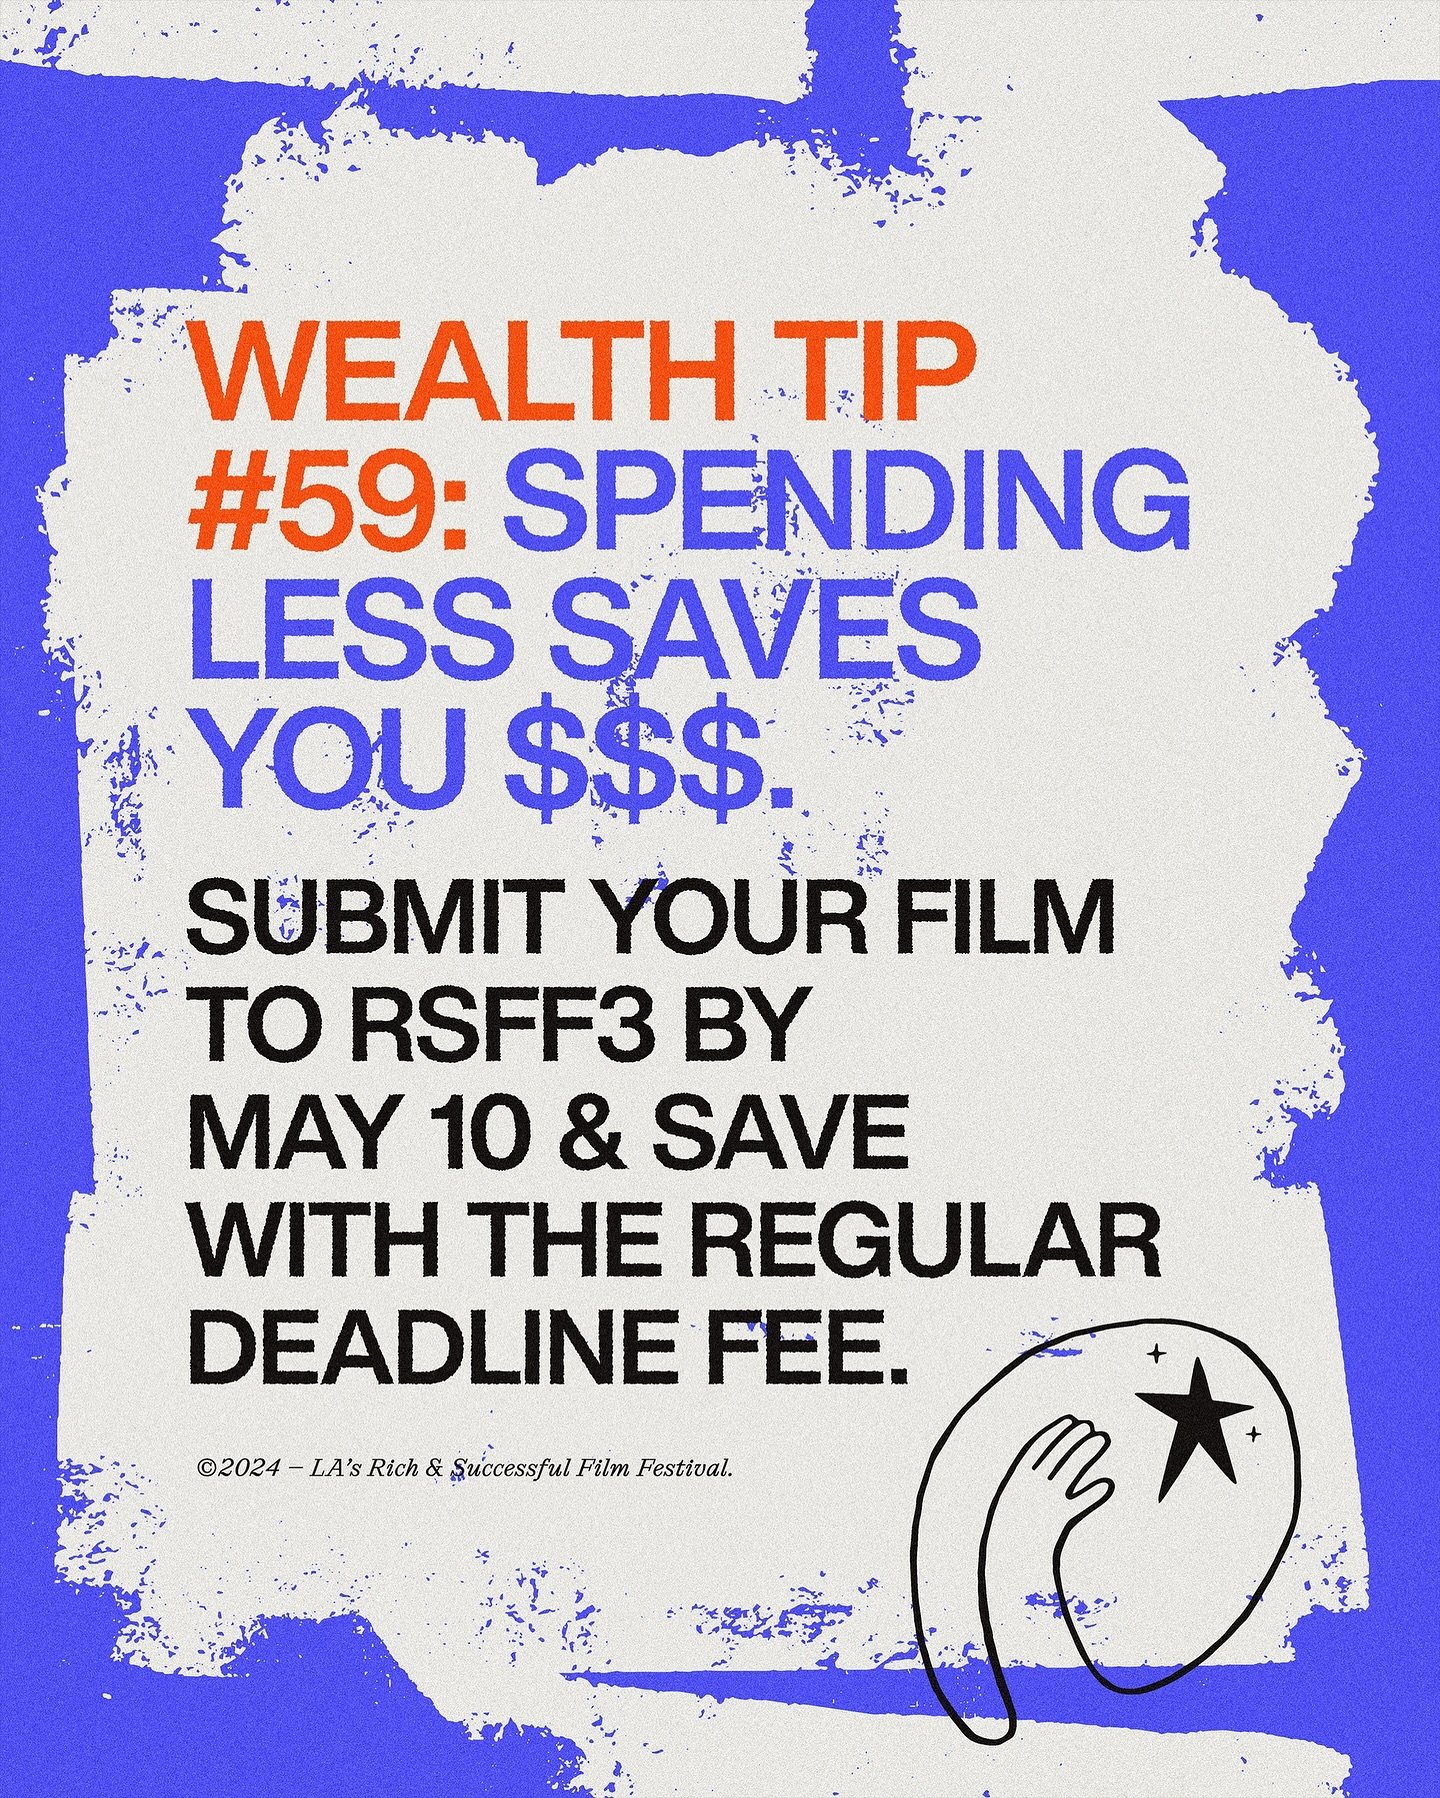 Preserve your capital and submit your film on FilmFreeway before the Regular Deadline this Friday, May 10 💸